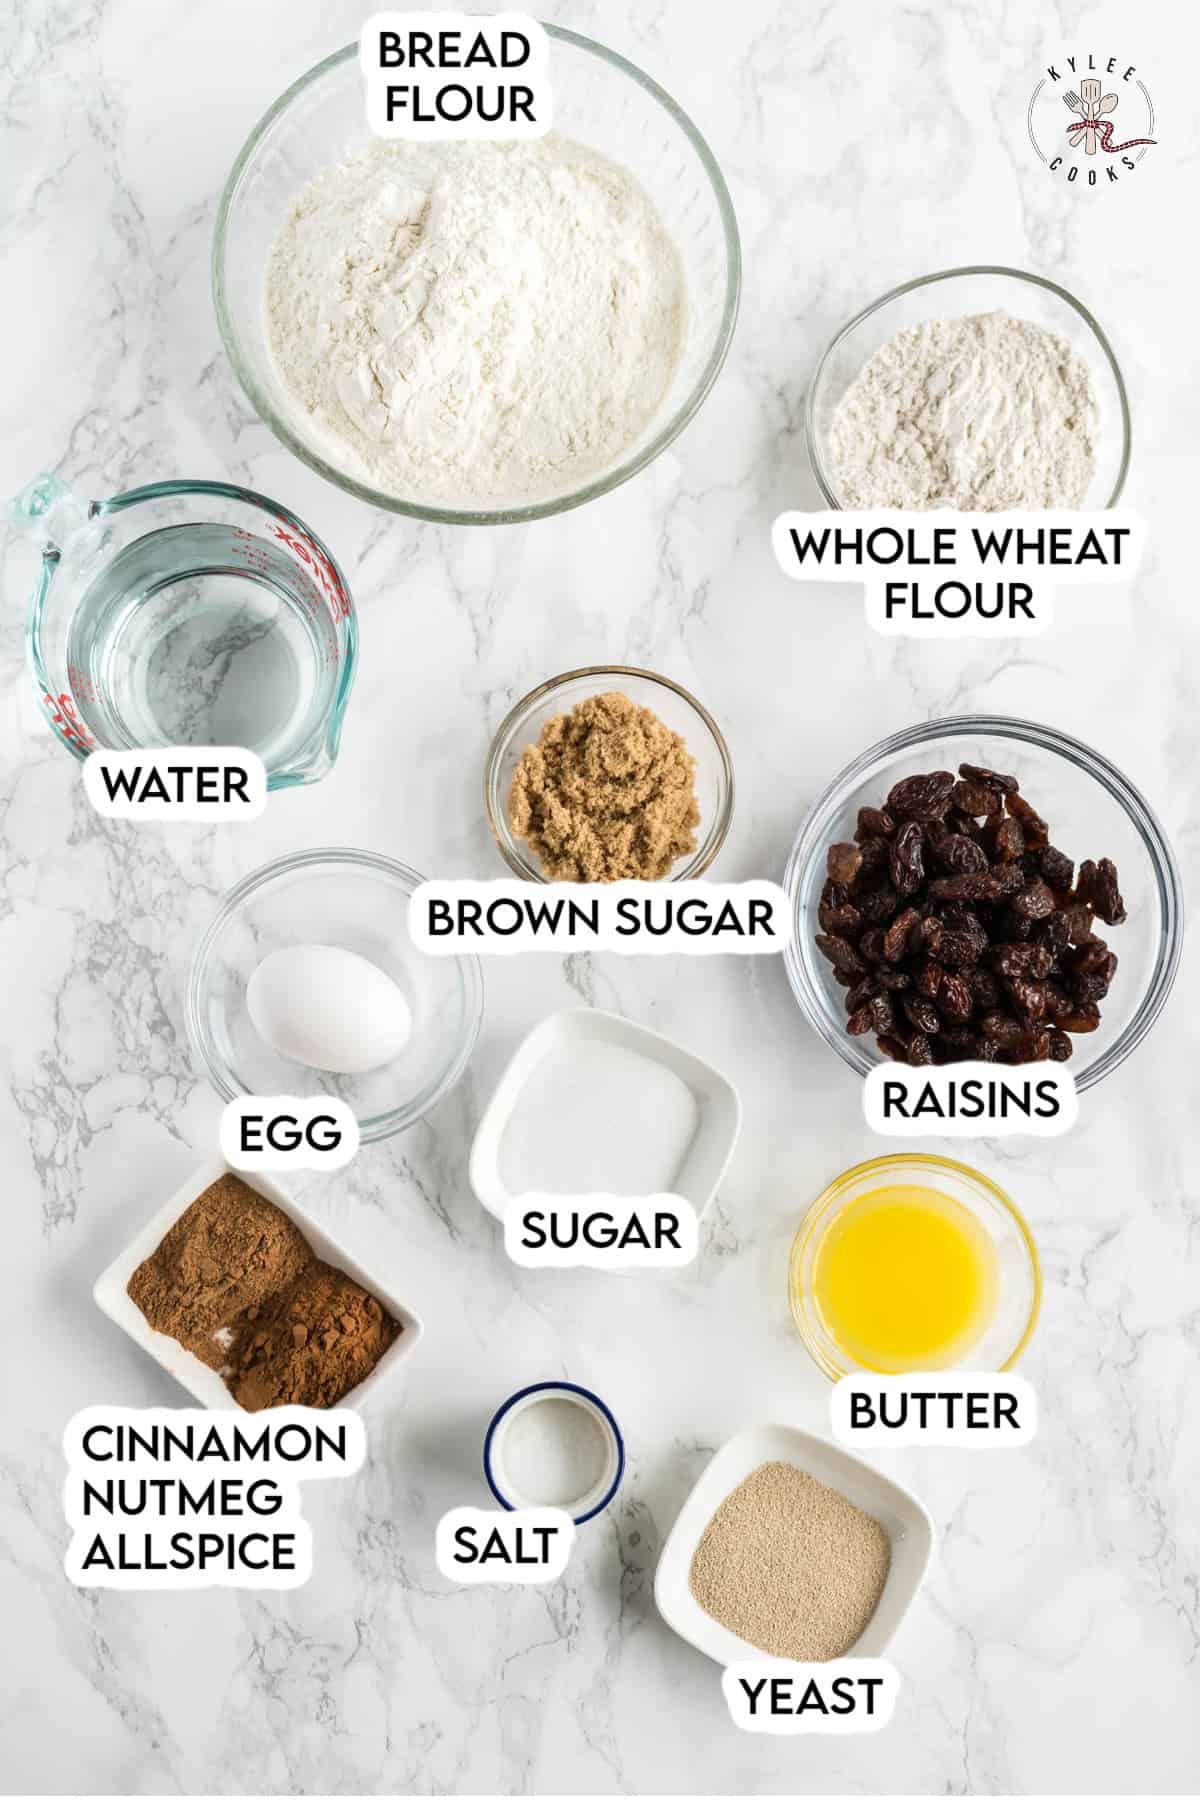 ingredients to make hot cross buns laid out and labeled.